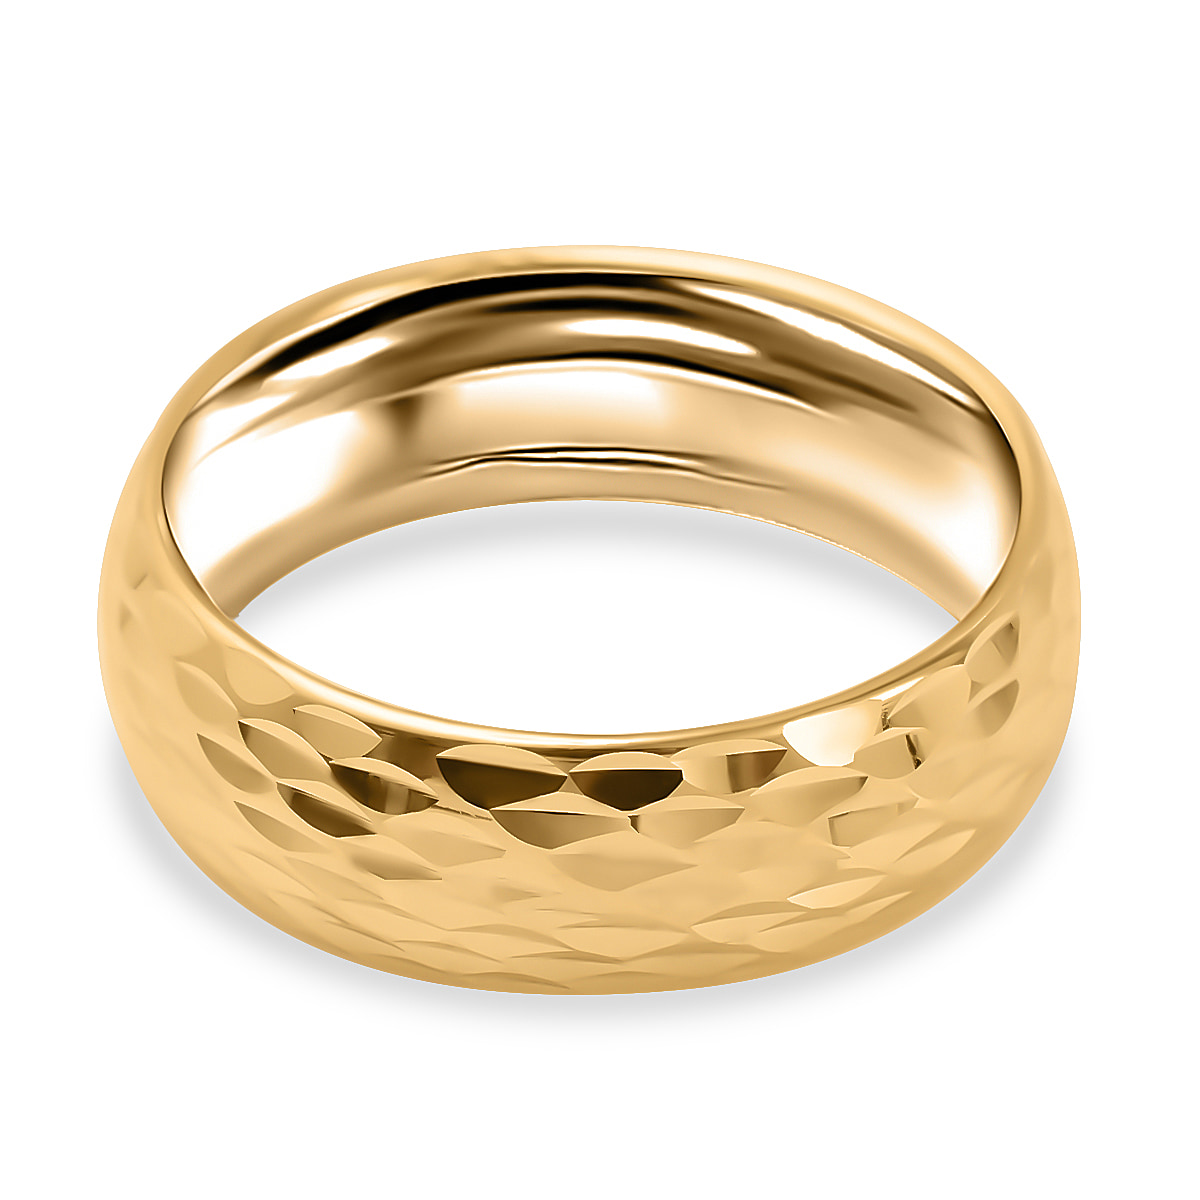 Maestro Collection - 9K Yellow Gold Diamond Cut Band Ring